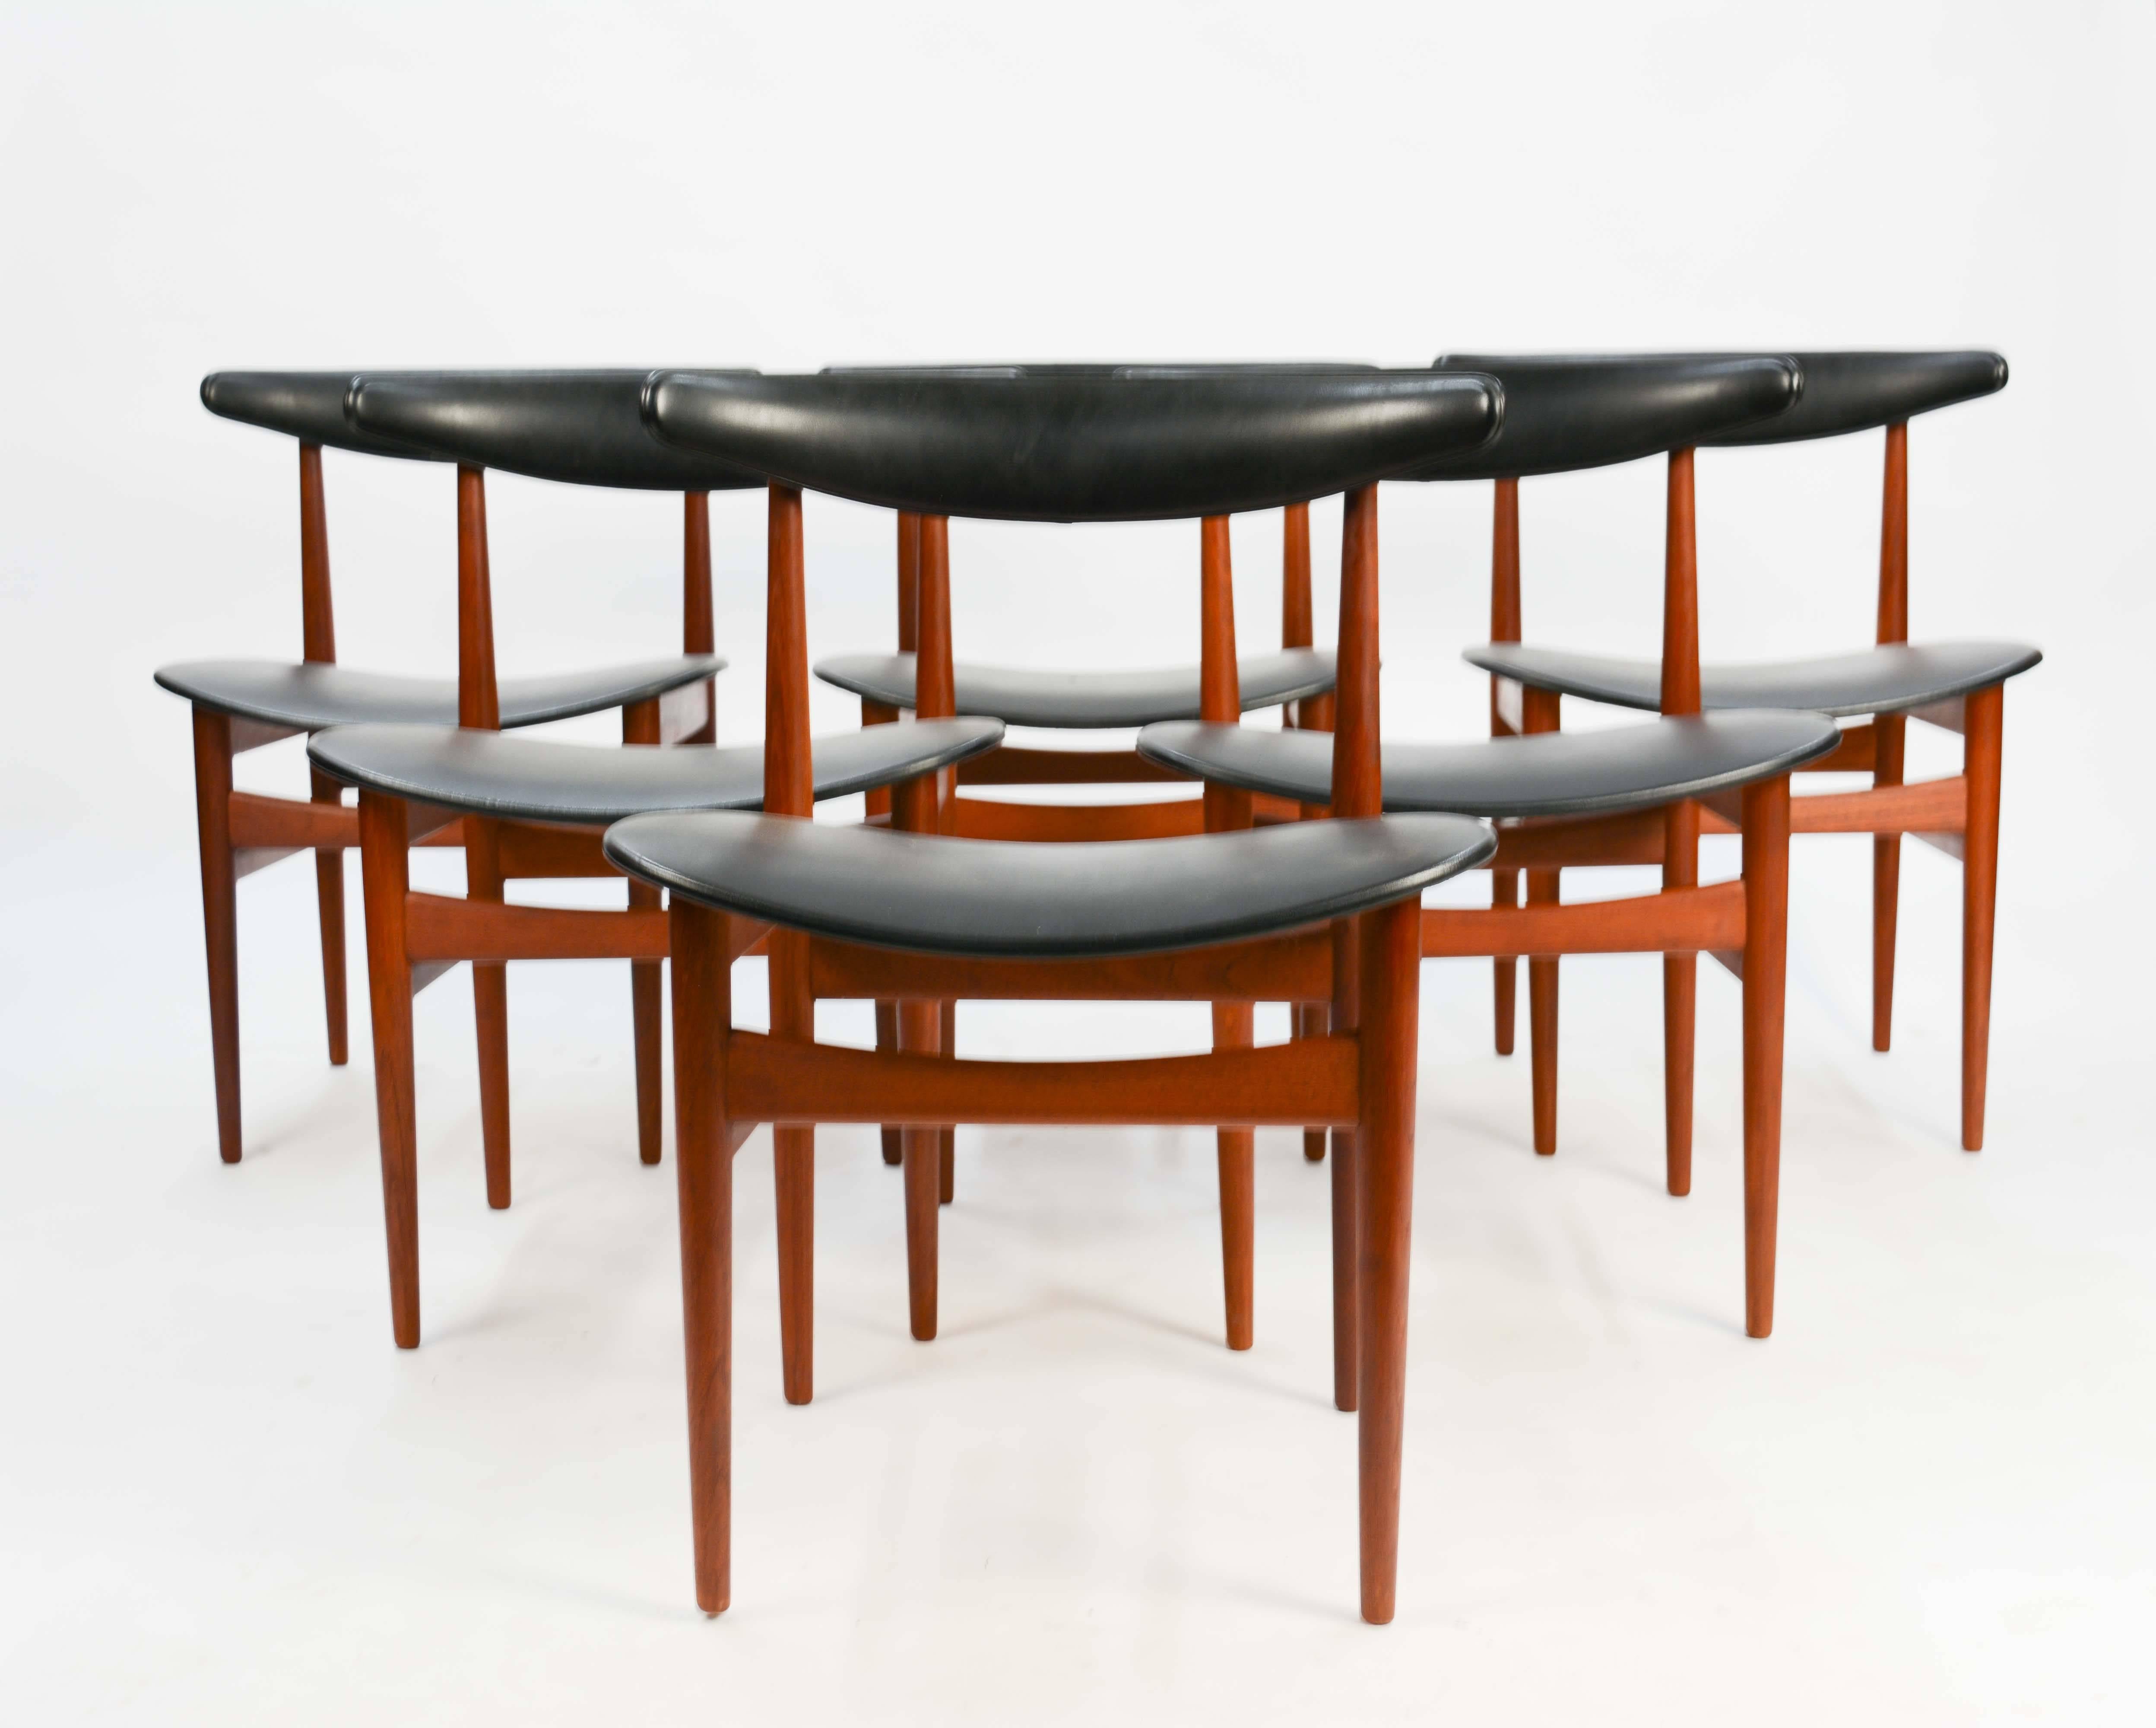 The Model 218A's in the manner of Poul Hundevad for Vamdrup Stolefabrik, Denmark, 1965. The chairs are in excellent vintage condition. The surround backs and wide seats make these chairs and excellent choice for those who want to entertain long